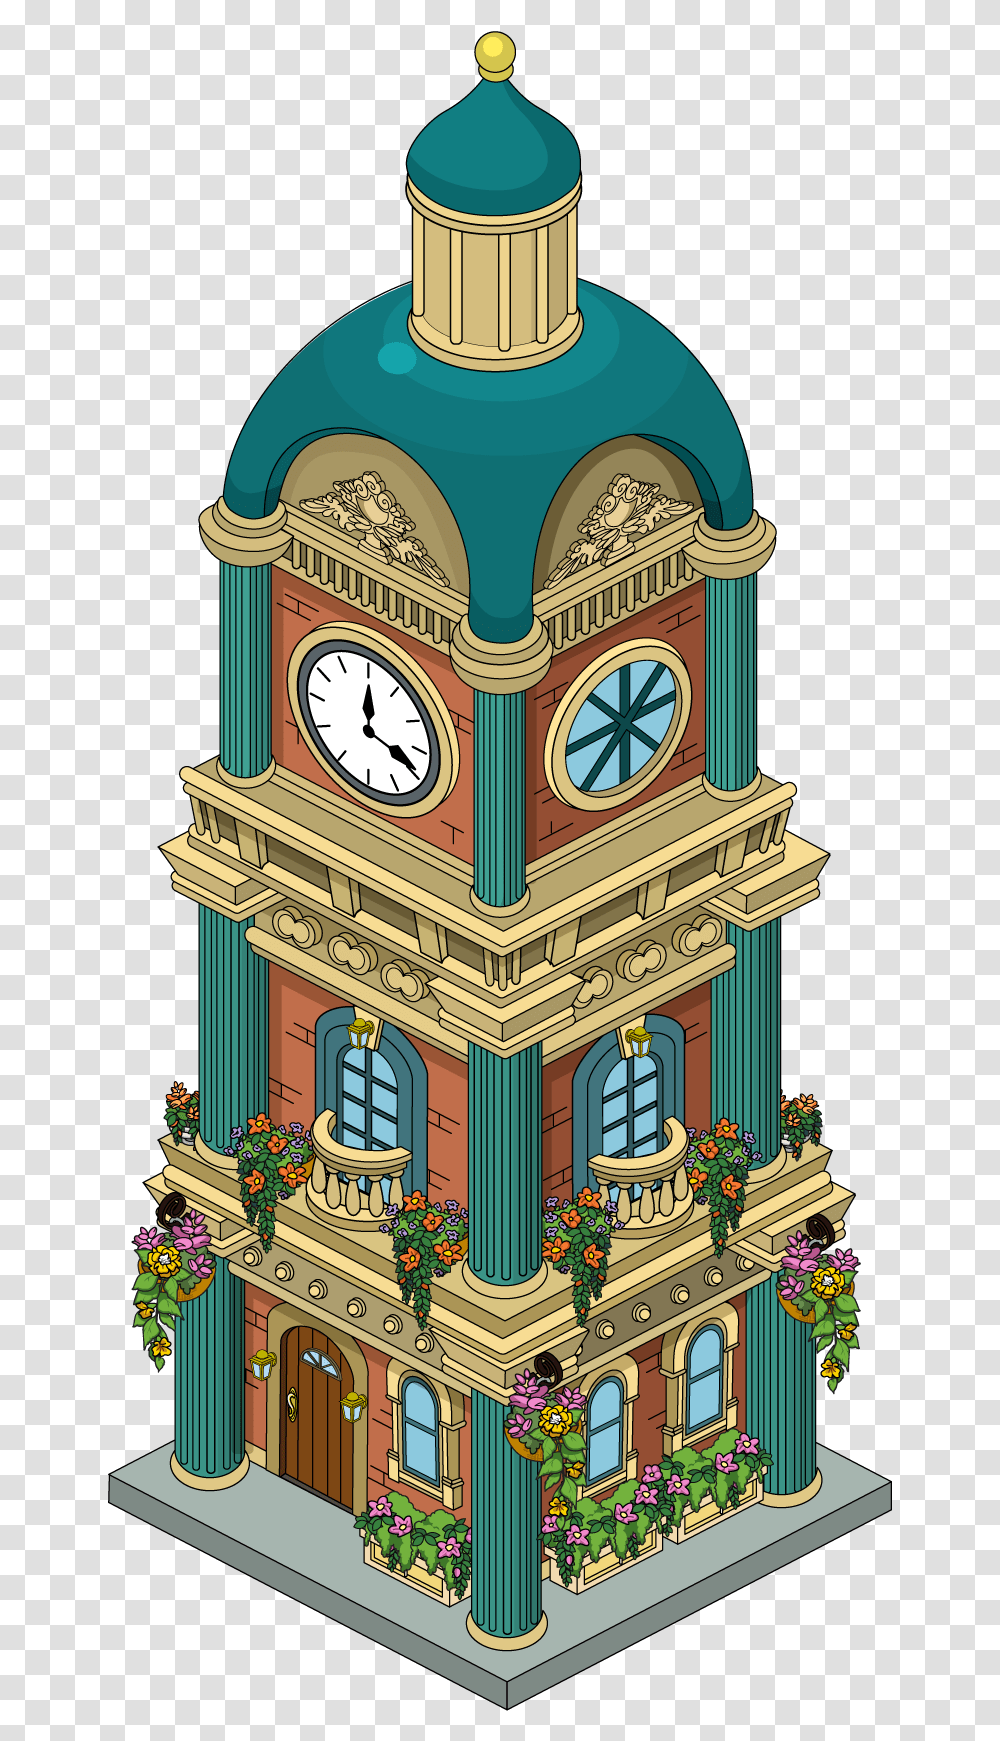 The Quest For Stuff Wiki Illustration, Tower, Architecture, Building, Clock Tower Transparent Png